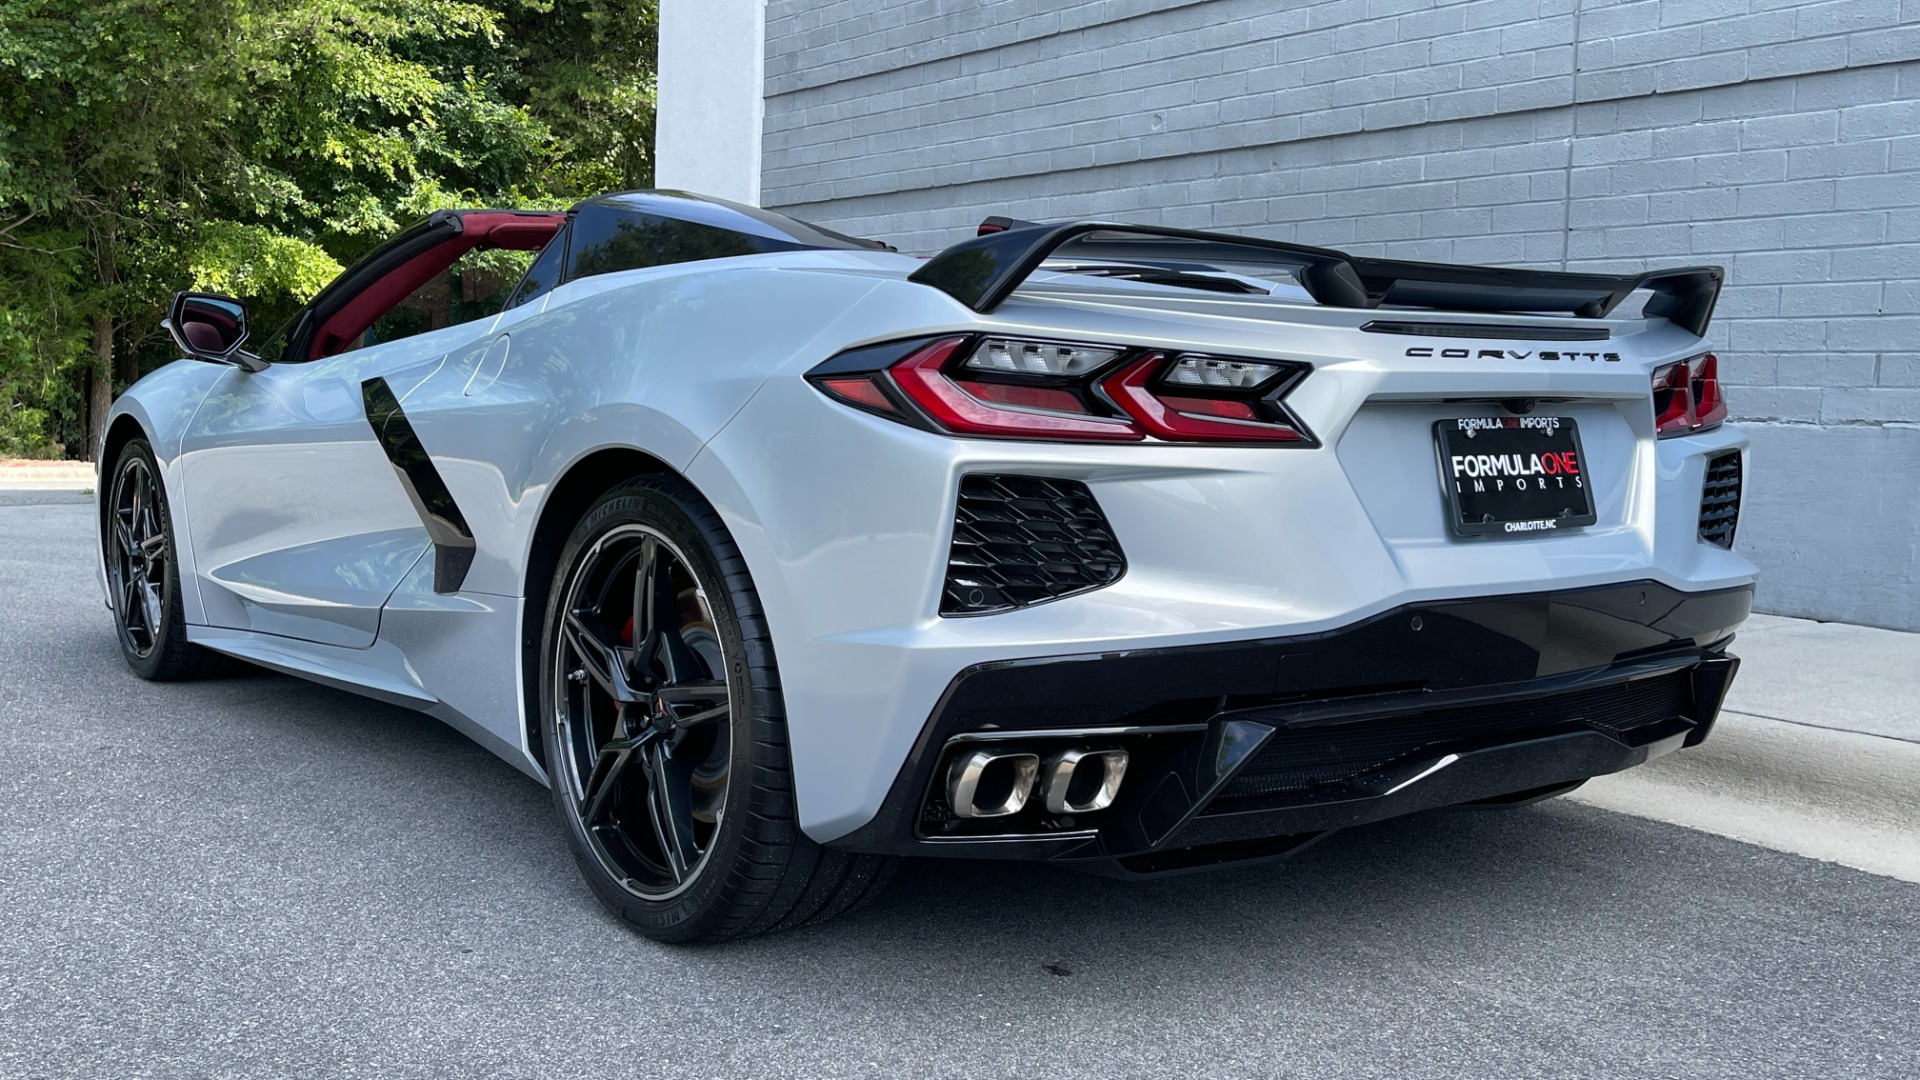 Used 2021 Chevrolet Corvette 3LT / MORELLO DIPPED INTERIOR / Z51 PERF PACK / FRONT LIFT for sale $119,000 at Formula Imports in Charlotte NC 28227 3